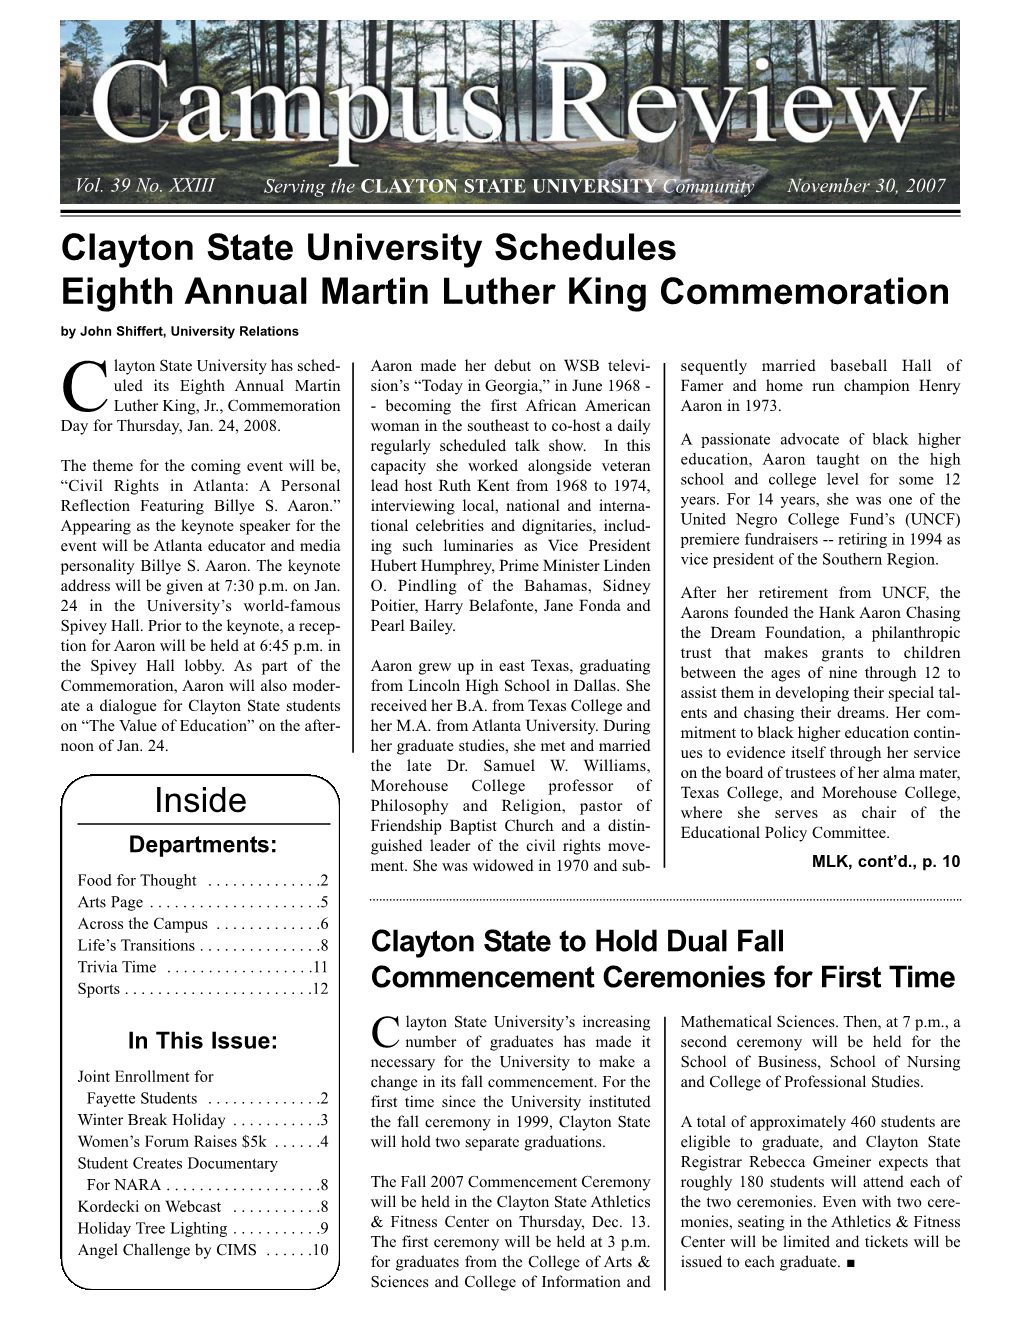 Clayton State University Schedules Eighth Annual Martin Luther King Commemoration by John Shiffert, University Relations